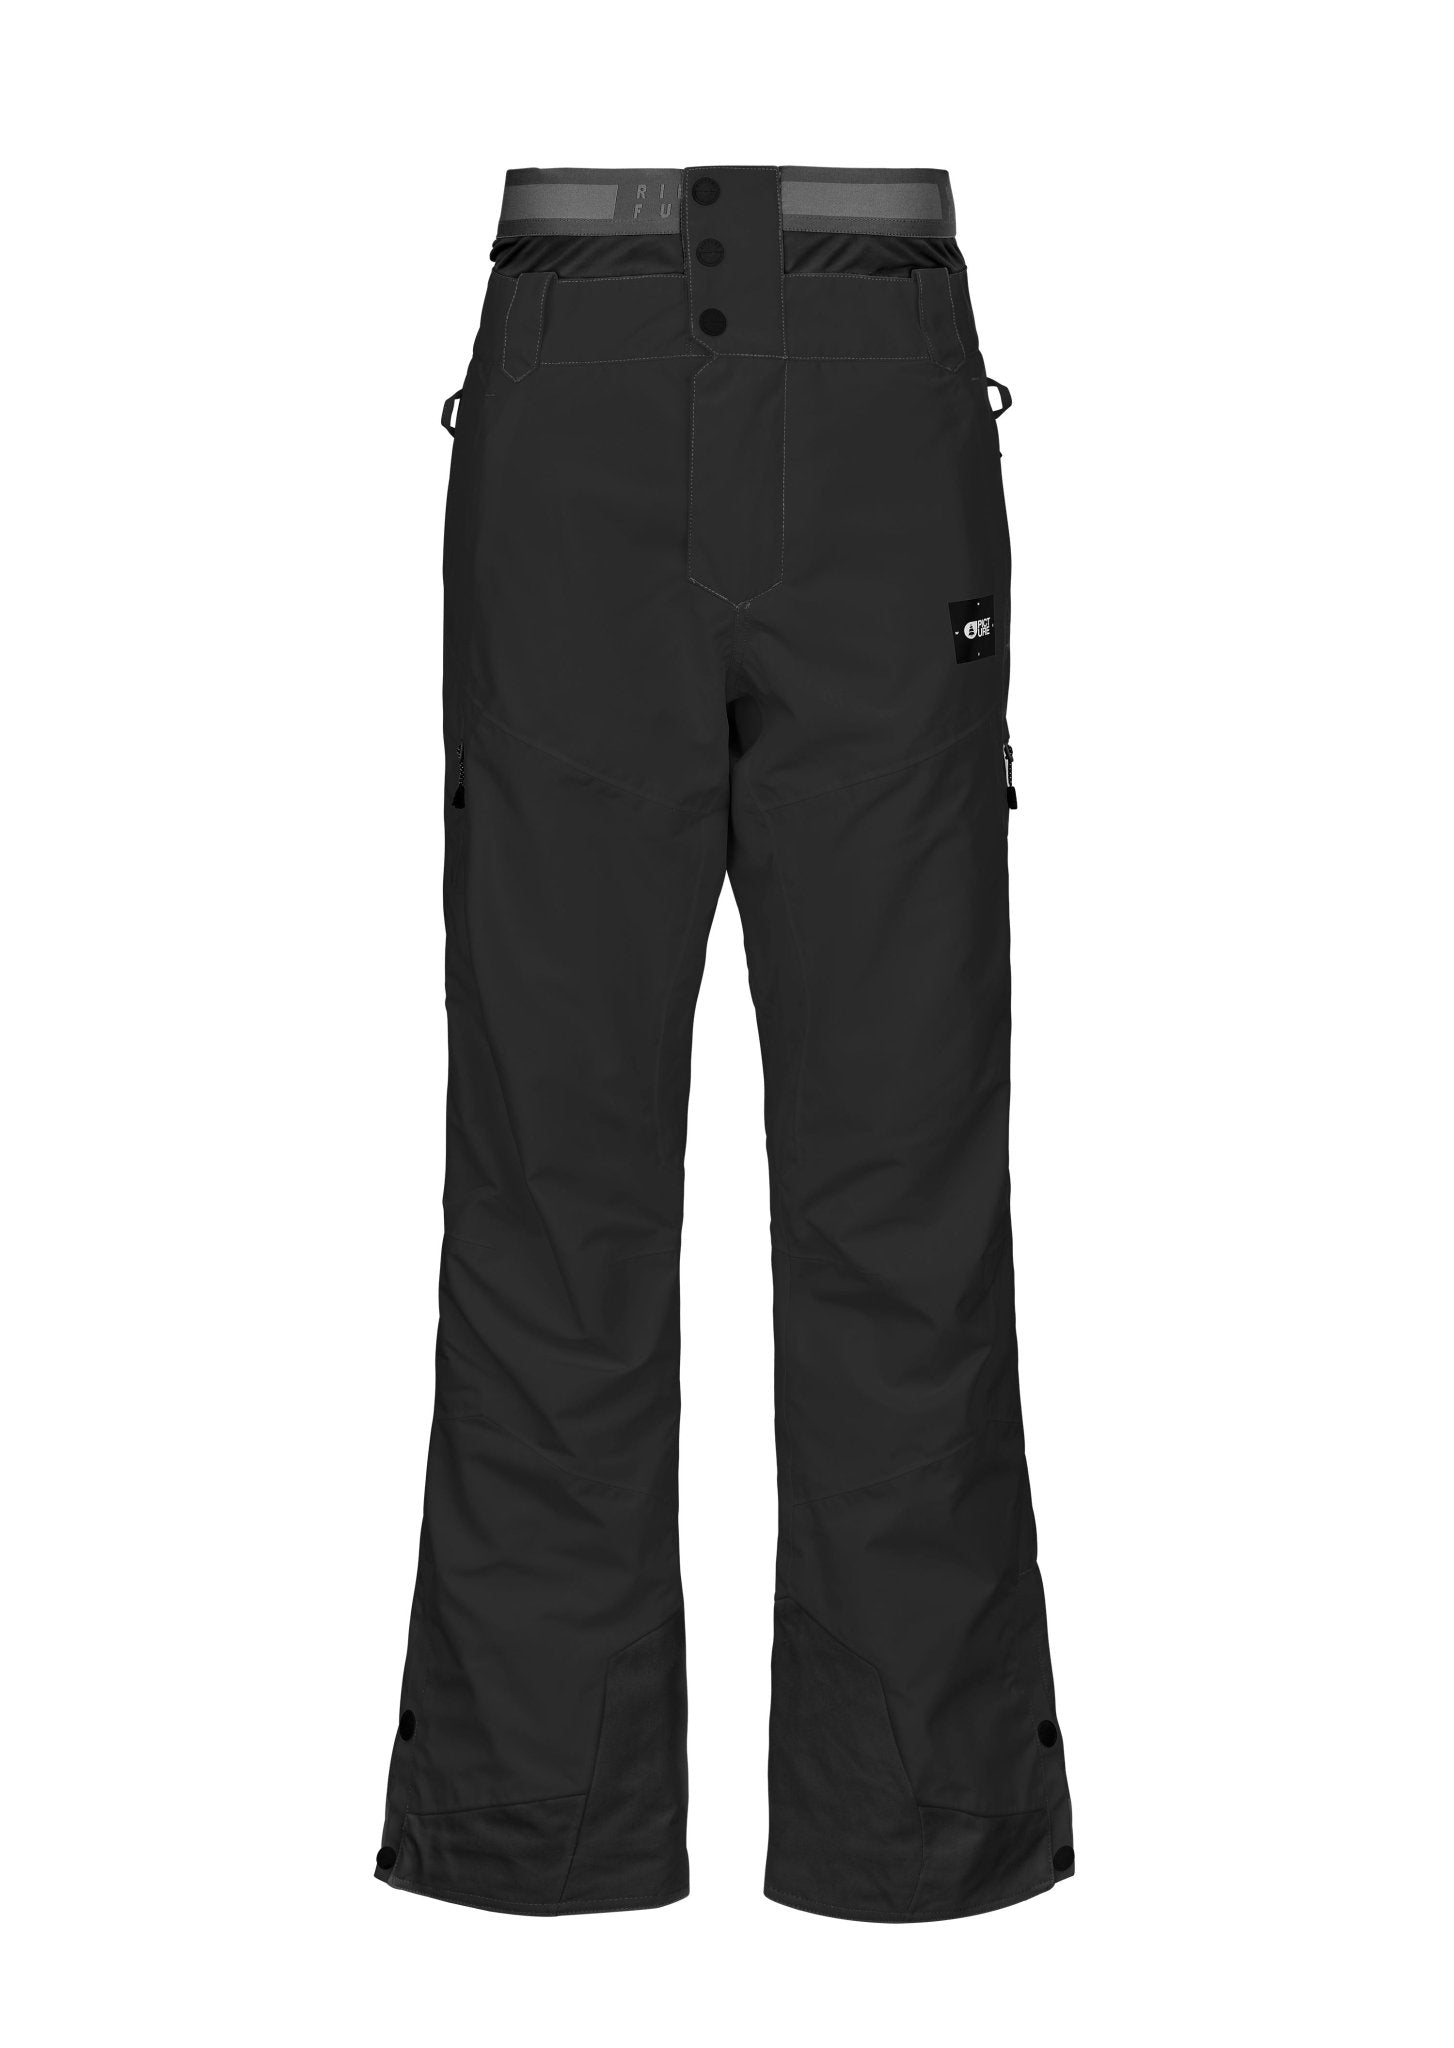 Picture Object Pant W23 - Snowride Sports